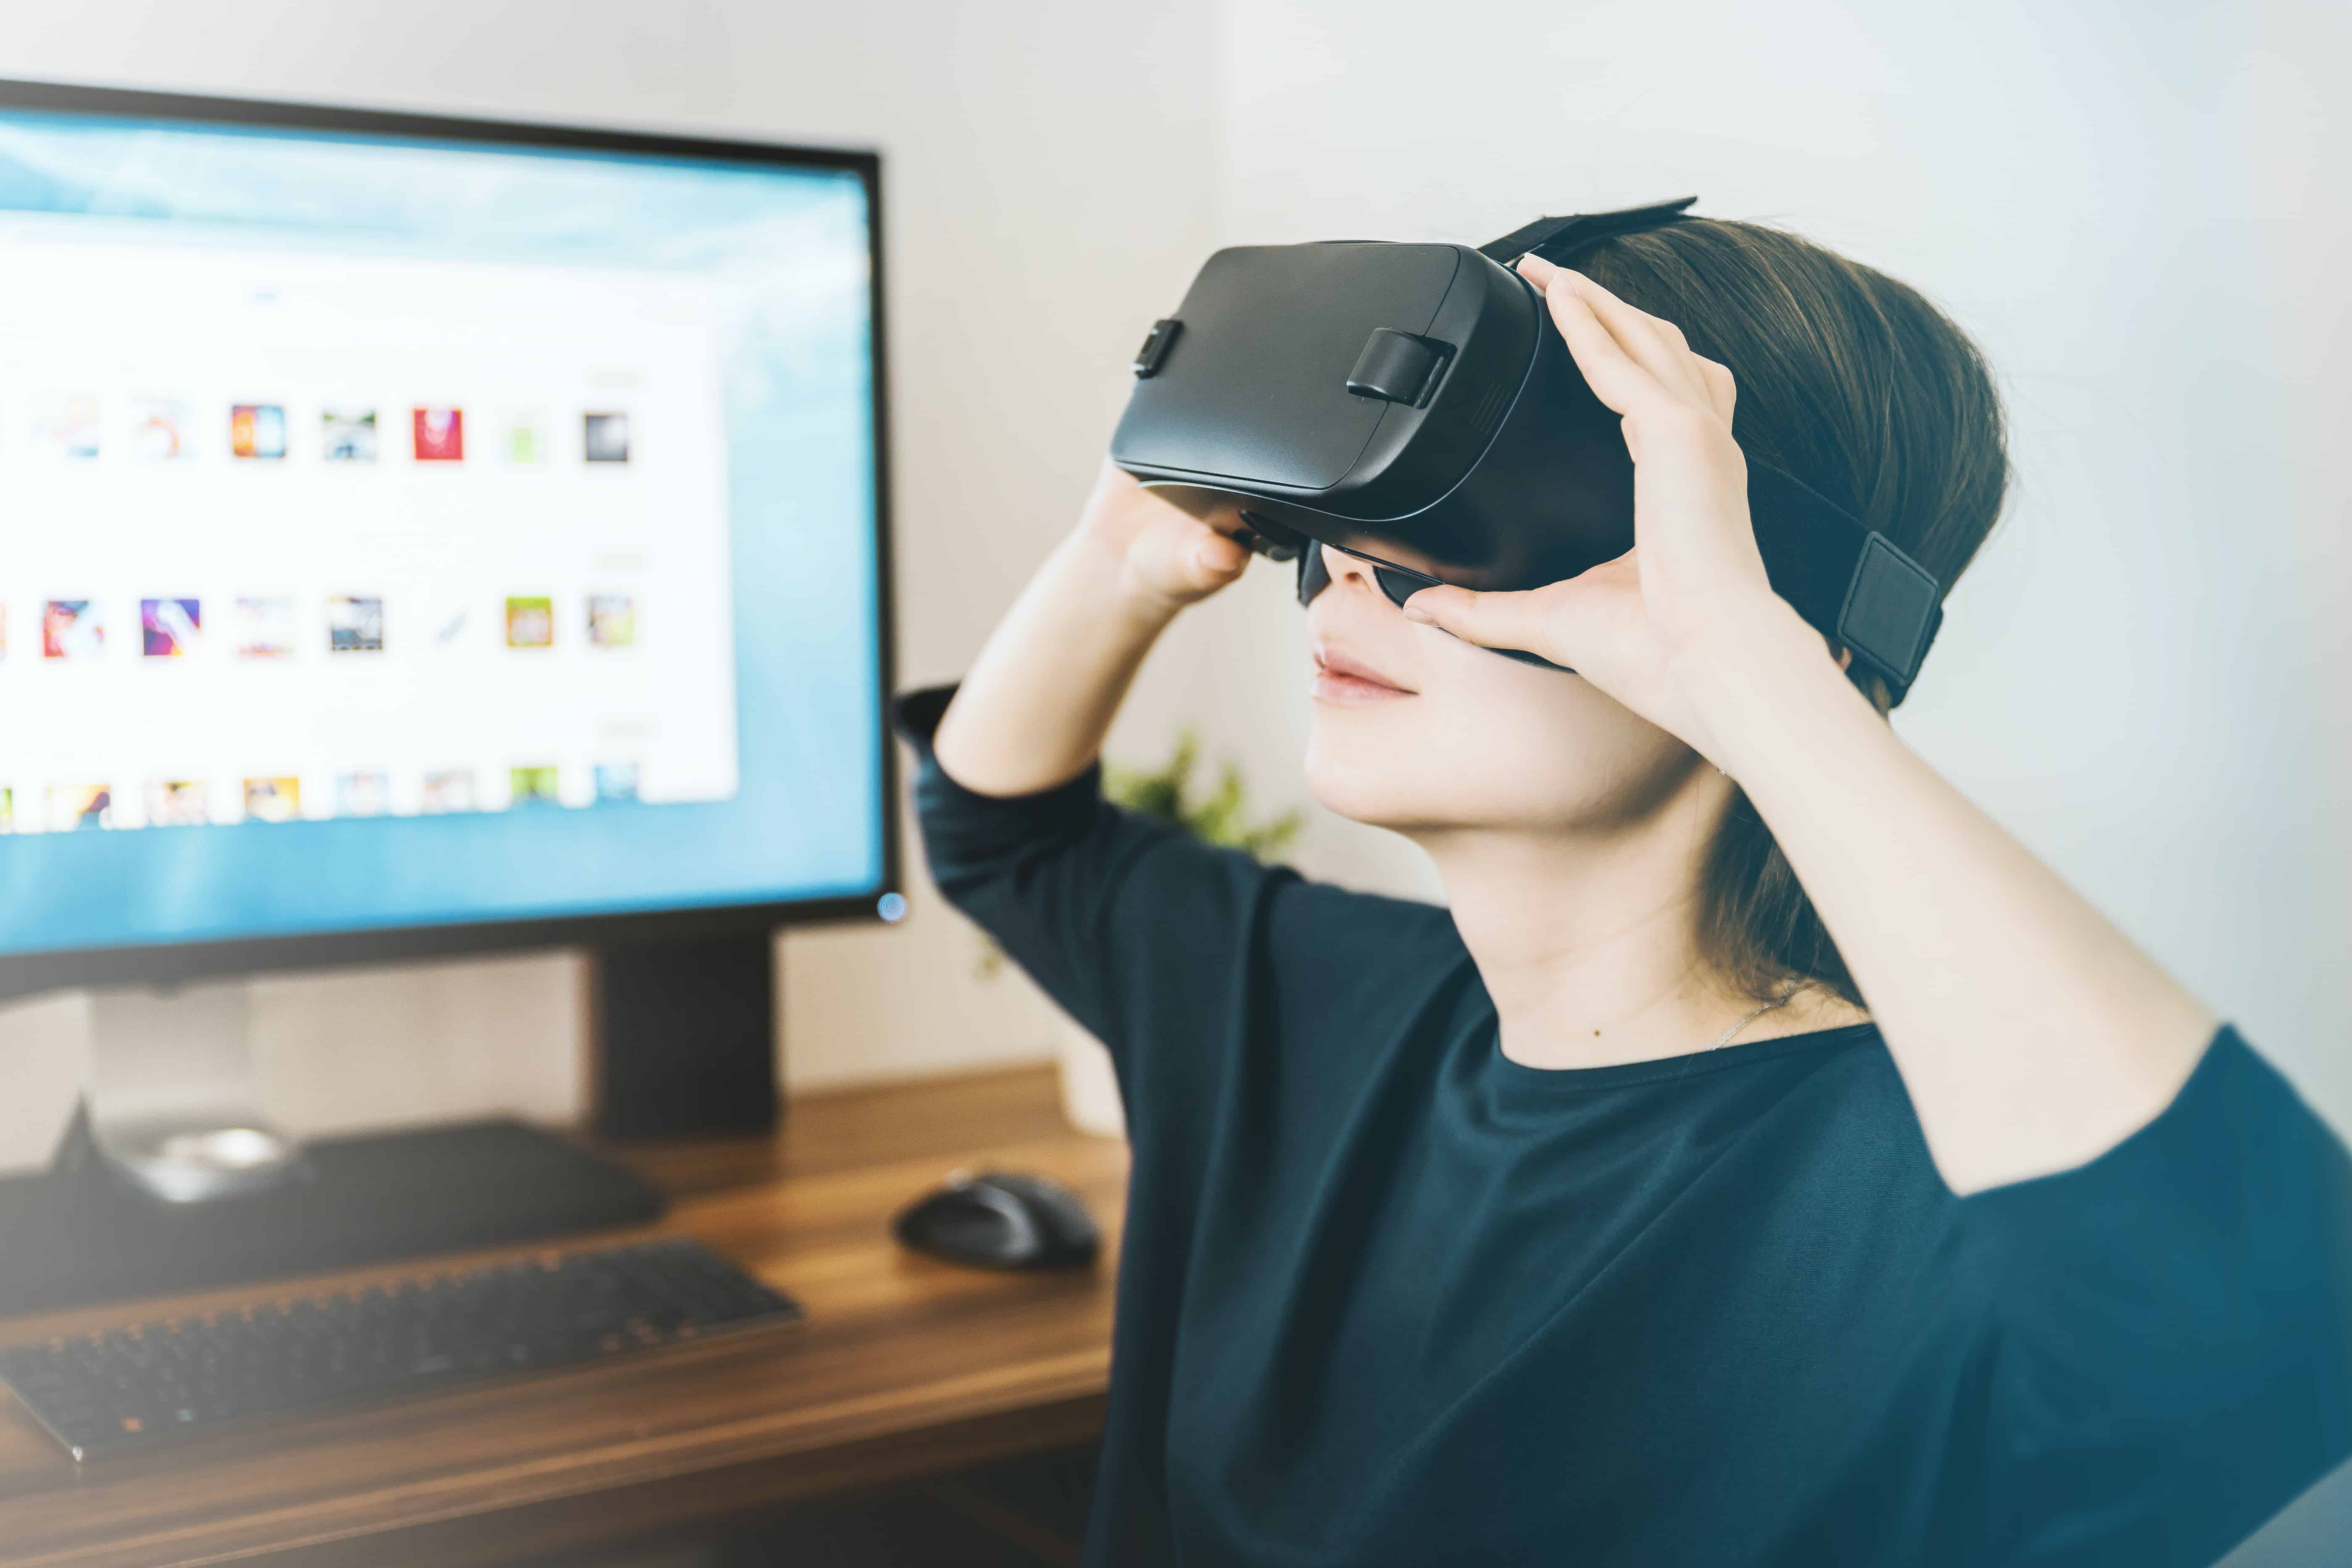 Virtual reality games can be used as a tool in personnel assessment